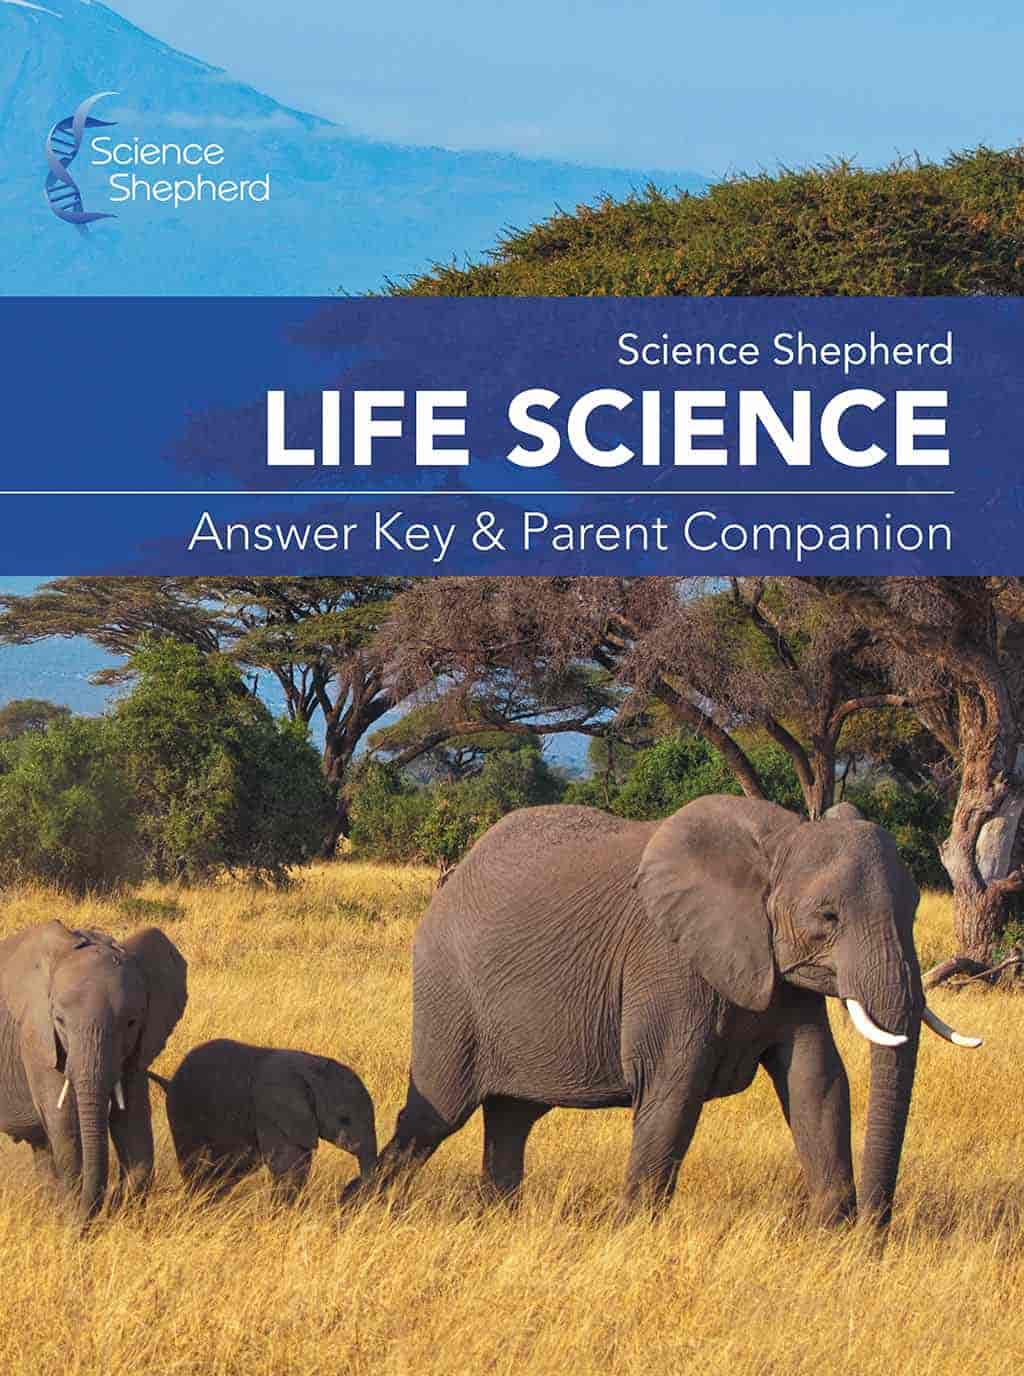 Life Science homeschooling Answer Key &amp; Parent Companion 2nd Ed. book cover of elephants in Africa